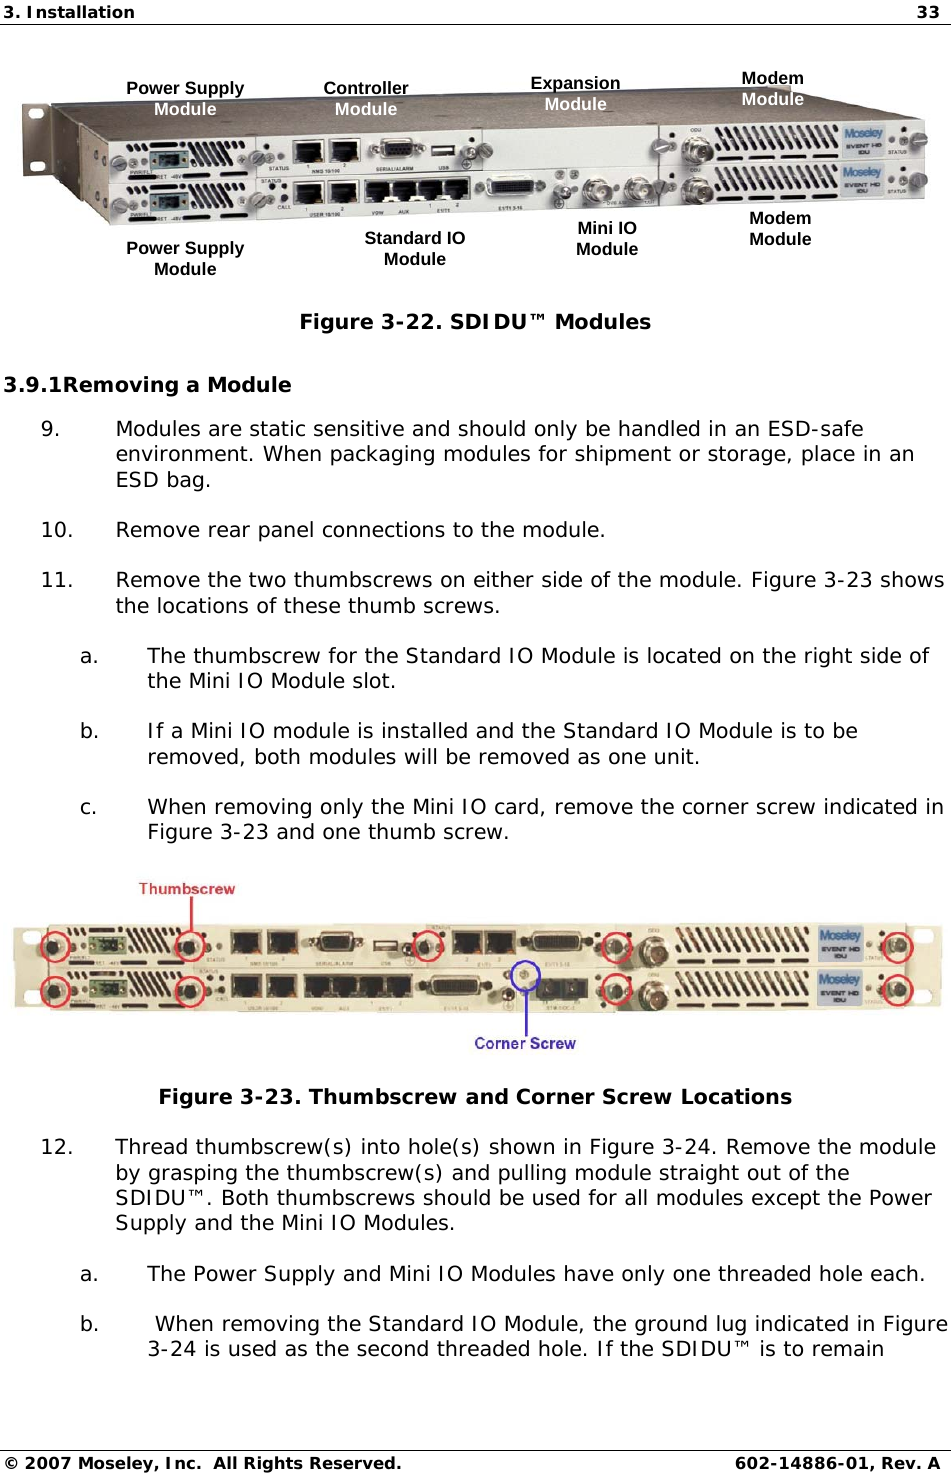 3. Installation  33 © 2007 Moseley, Inc.  All Rights Reserved.  602-14886-01, Rev. A Power Supply ModulePower Supply ModuleController ModuleStandard IO ModuleMini IO ModuleExpansion ModuleModem ModuleModem Module Figure 3-22. SDIDU™ Modules 3.9.1Removing a Module 9. Modules are static sensitive and should only be handled in an ESD-safe environment. When packaging modules for shipment or storage, place in an ESD bag. 10. Remove rear panel connections to the module. 11. Remove the two thumbscrews on either side of the module. Figure 3-23 shows the locations of these thumb screws. a. The thumbscrew for the Standard IO Module is located on the right side of the Mini IO Module slot. b. If a Mini IO module is installed and the Standard IO Module is to be removed, both modules will be removed as one unit. c. When removing only the Mini IO card, remove the corner screw indicated in Figure 3-23 and one thumb screw.  Figure 3-23. Thumbscrew and Corner Screw Locations 12. Thread thumbscrew(s) into hole(s) shown in Figure 3-24. Remove the module by grasping the thumbscrew(s) and pulling module straight out of the SDIDU™. Both thumbscrews should be used for all modules except the Power Supply and the Mini IO Modules.  a. The Power Supply and Mini IO Modules have only one threaded hole each. b.  When removing the Standard IO Module, the ground lug indicated in Figure 3-24 is used as the second threaded hole. If the SDIDU™ is to remain 